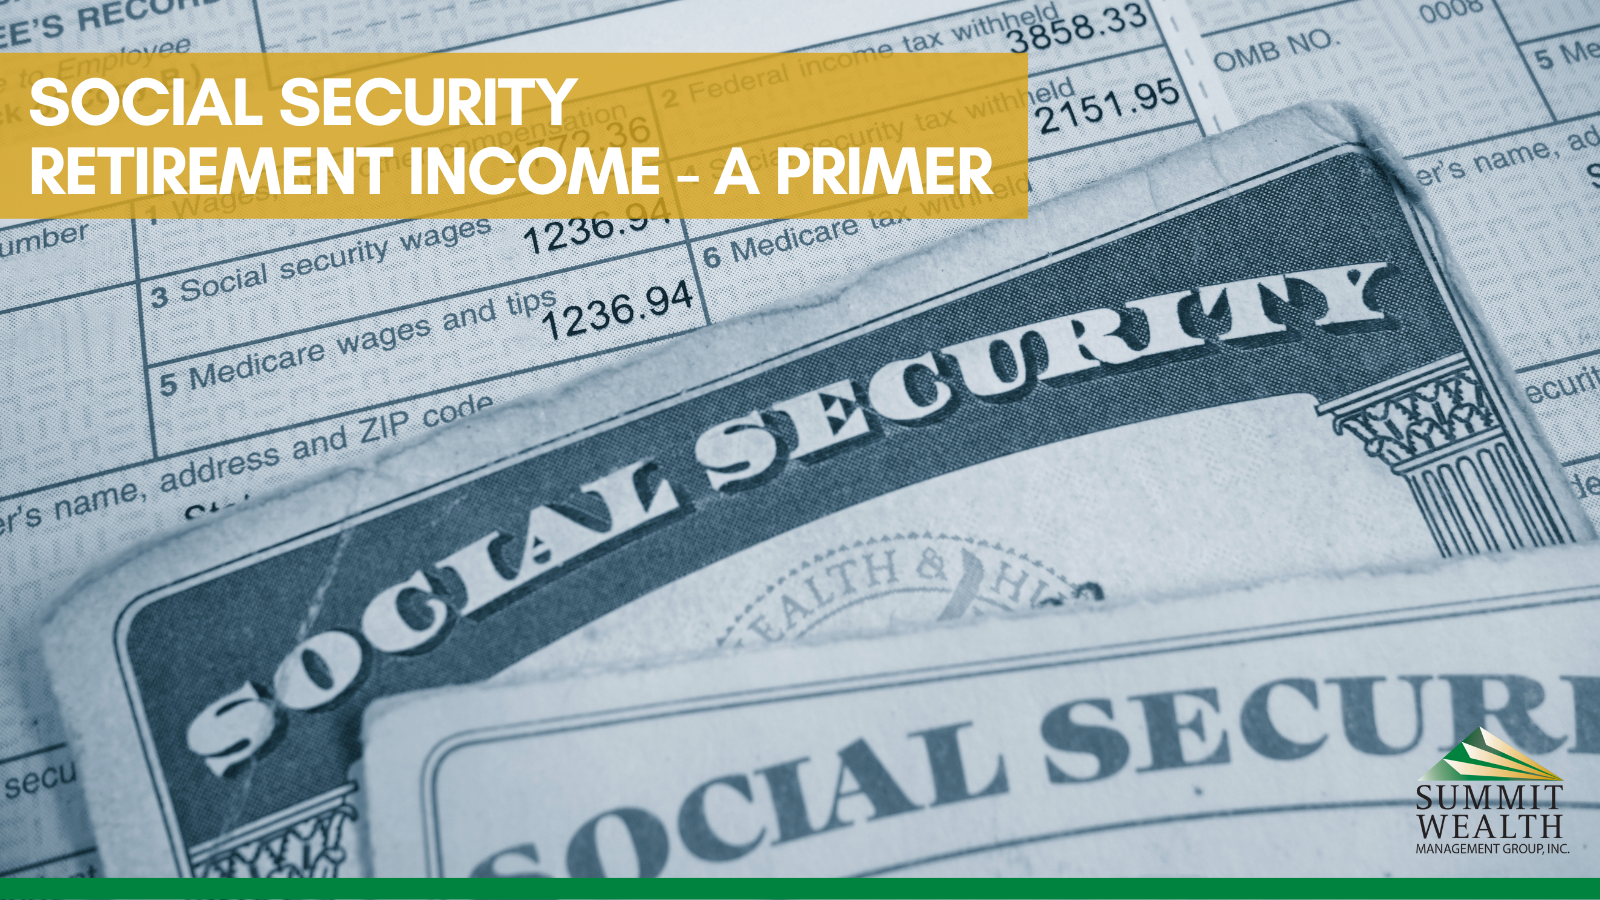 What Role Does Social Security Play in Your Retirement Income Strategy?